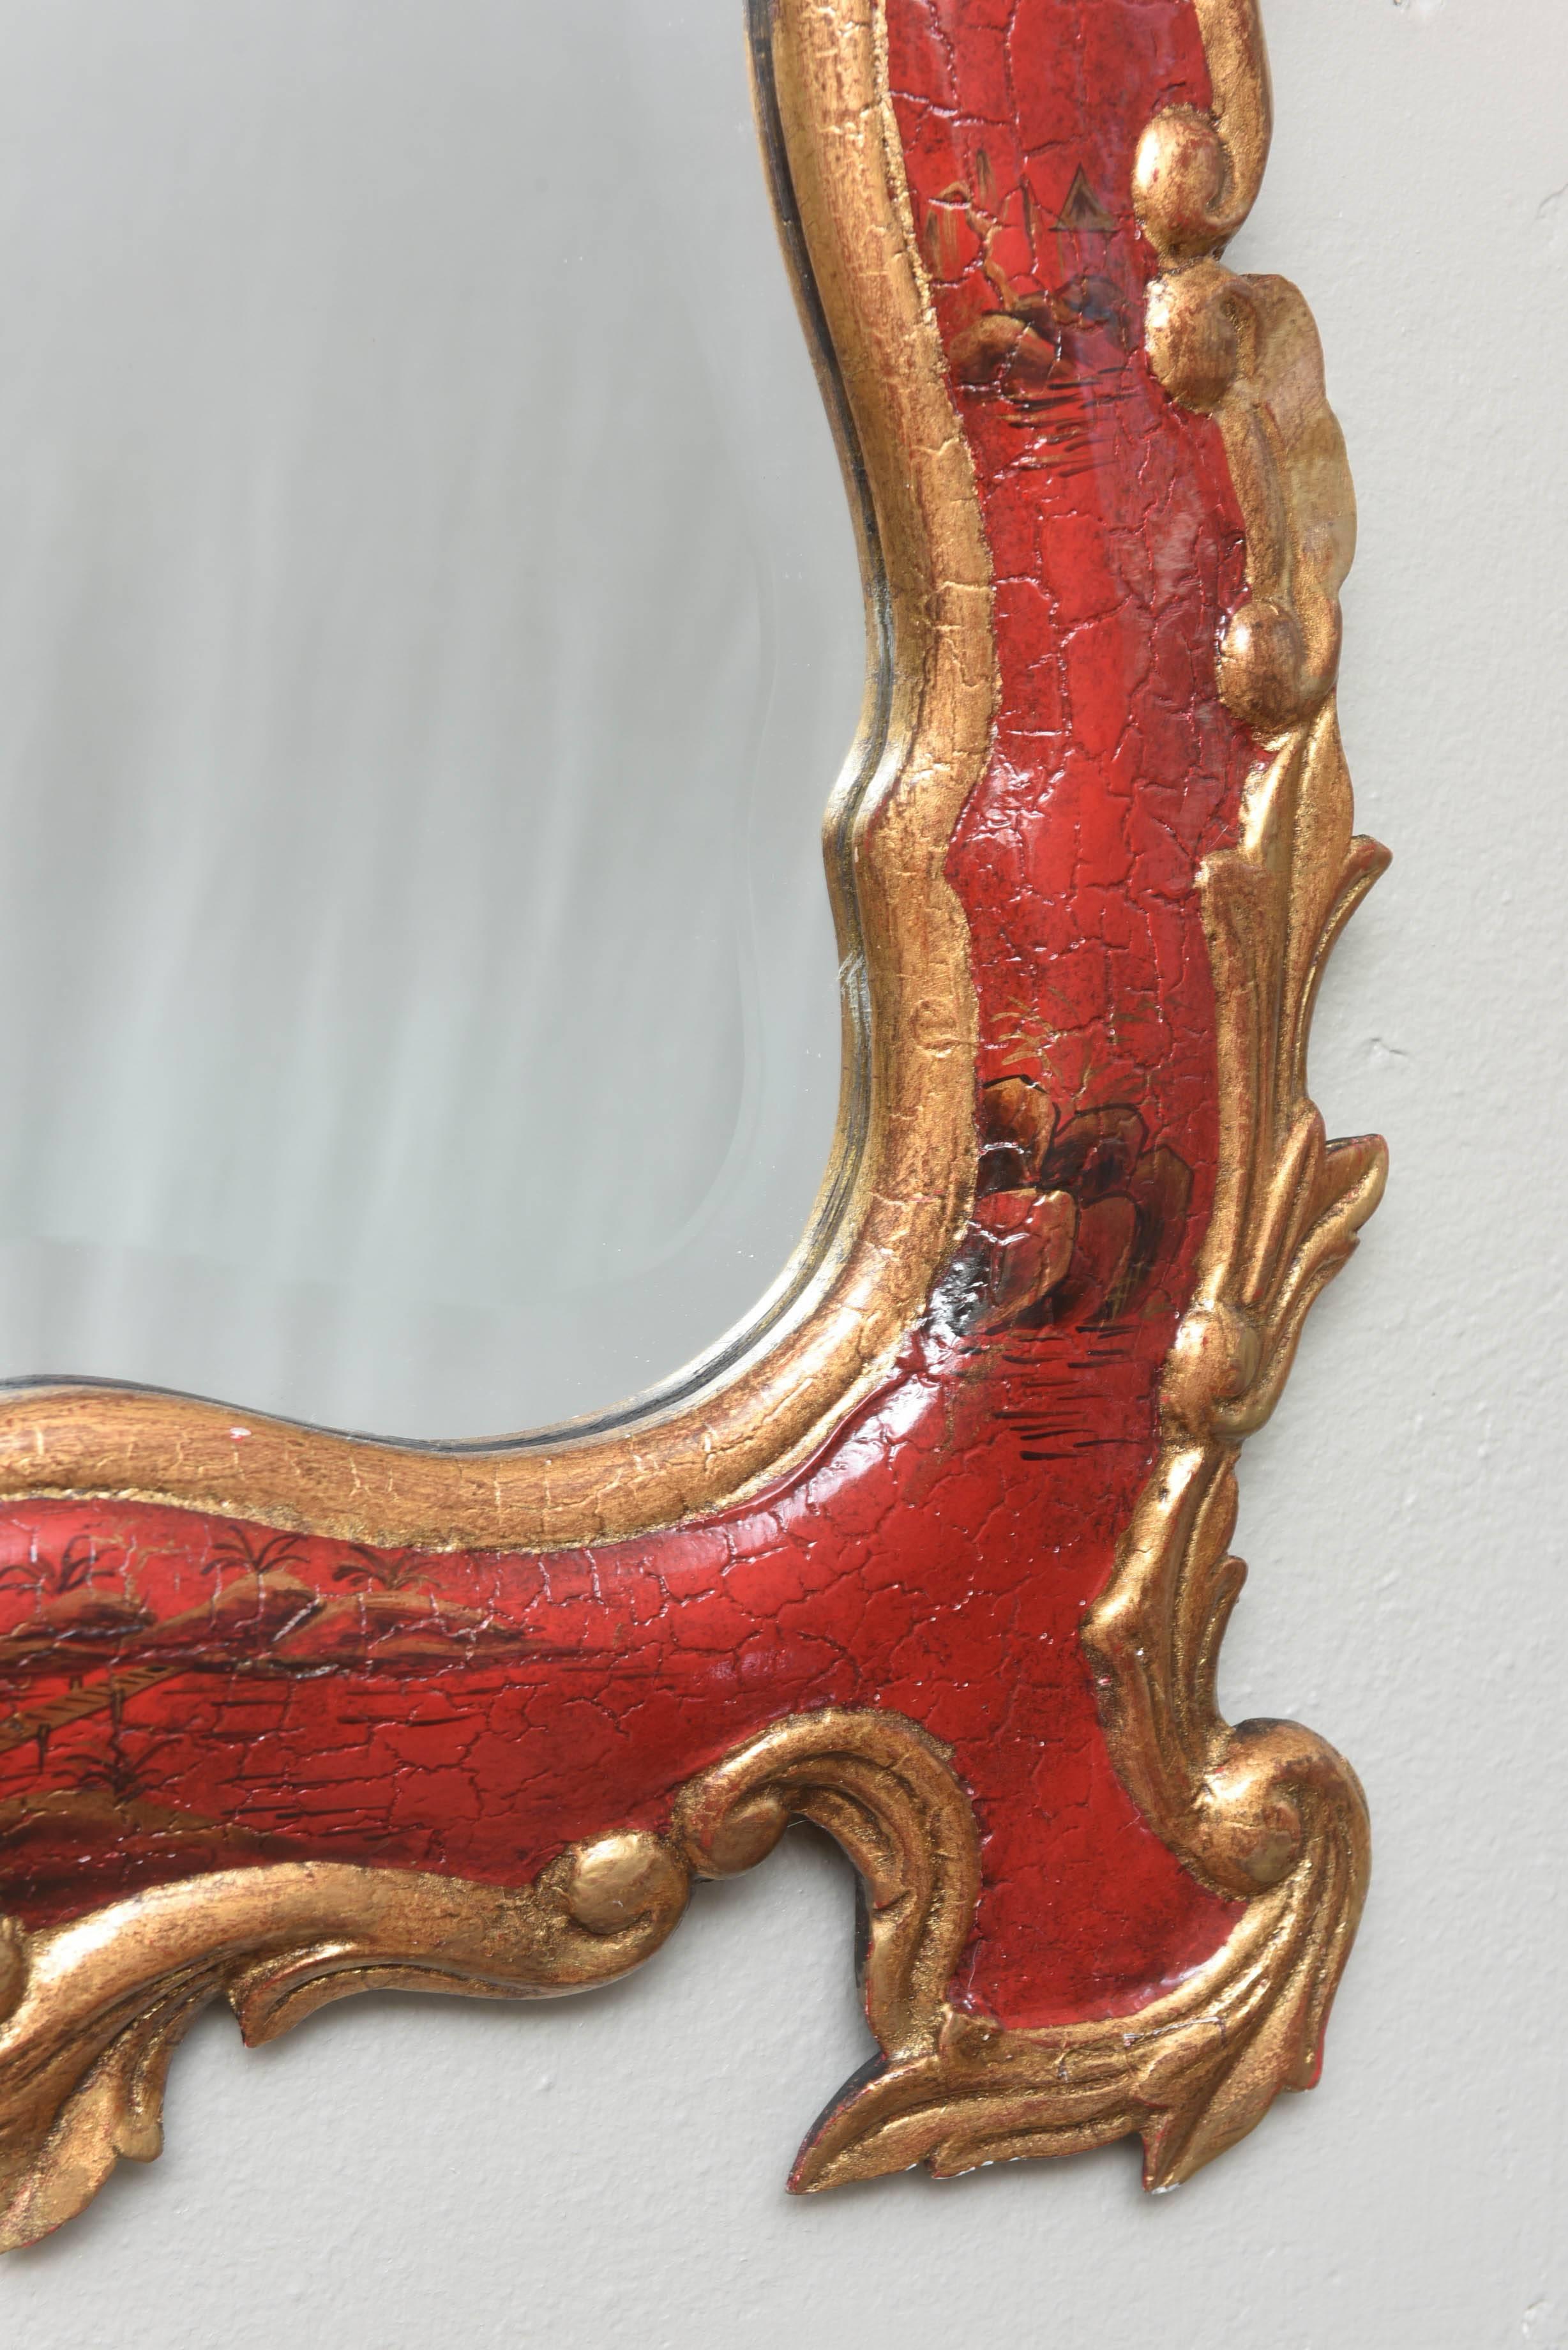 A striking and well proportioned mirror retaining its vibrant red color, gilding and faux finish and hand painting. Timeless Chinoiserie design, always in style and in very nice condition. Please inquire if you need more pictures or information.